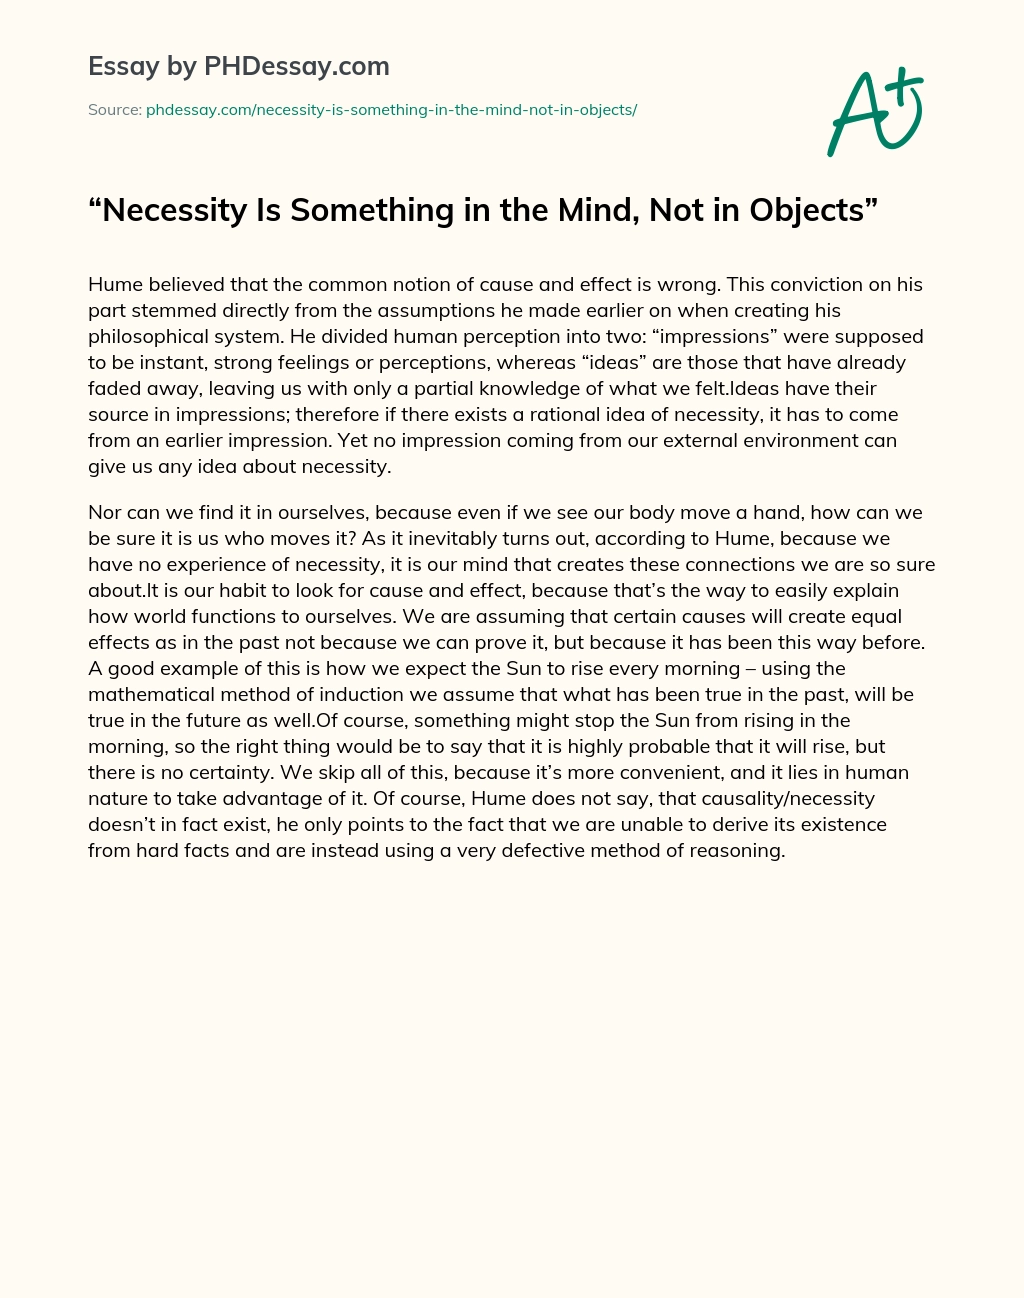 Necessity Is Something in the Mind, Not in Objects essay